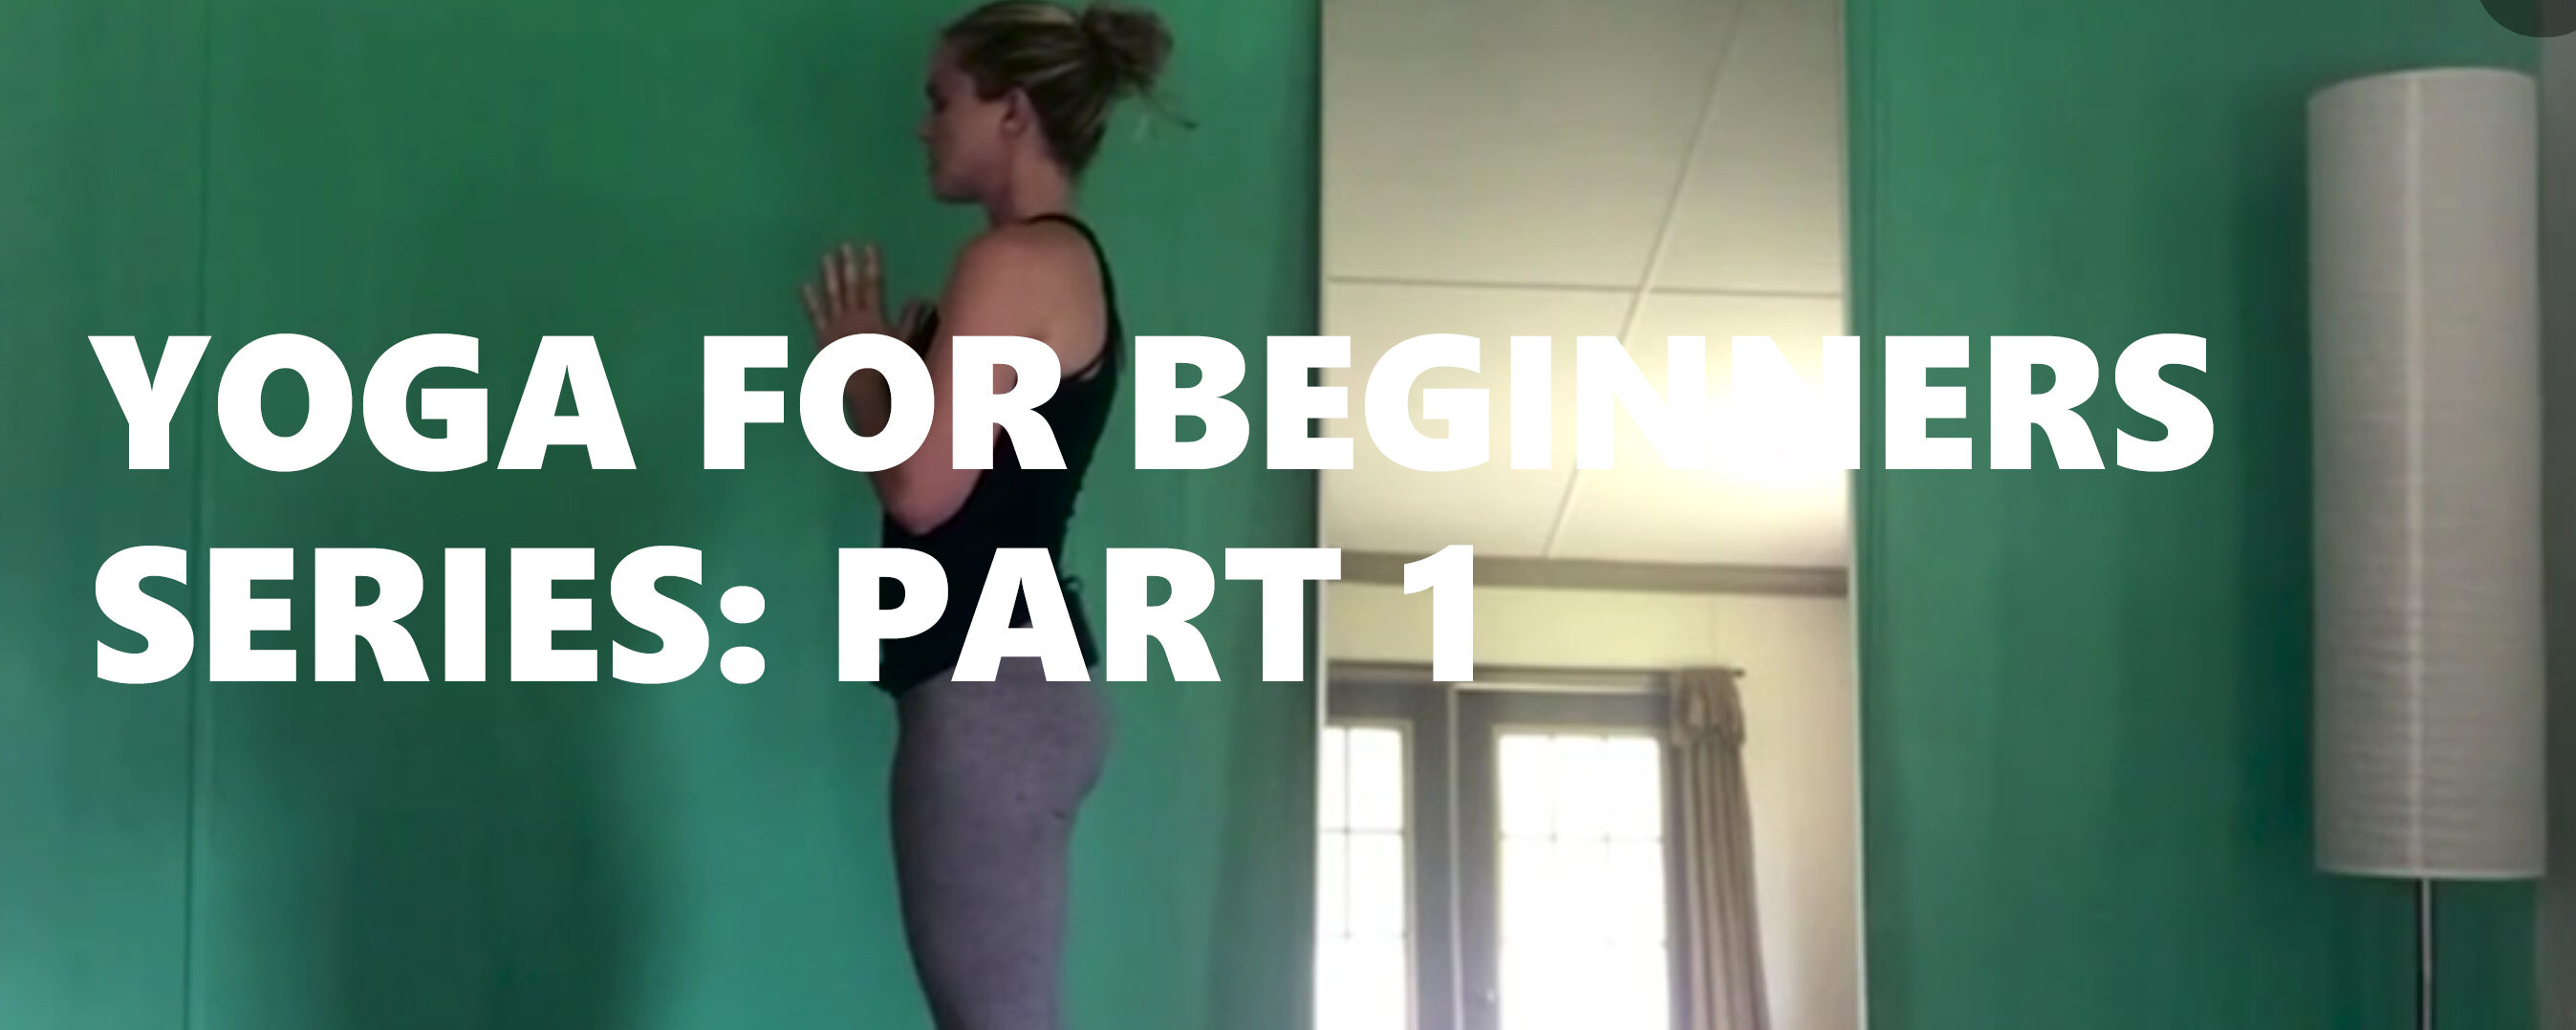 Yoga for Beginners Series: Part 1